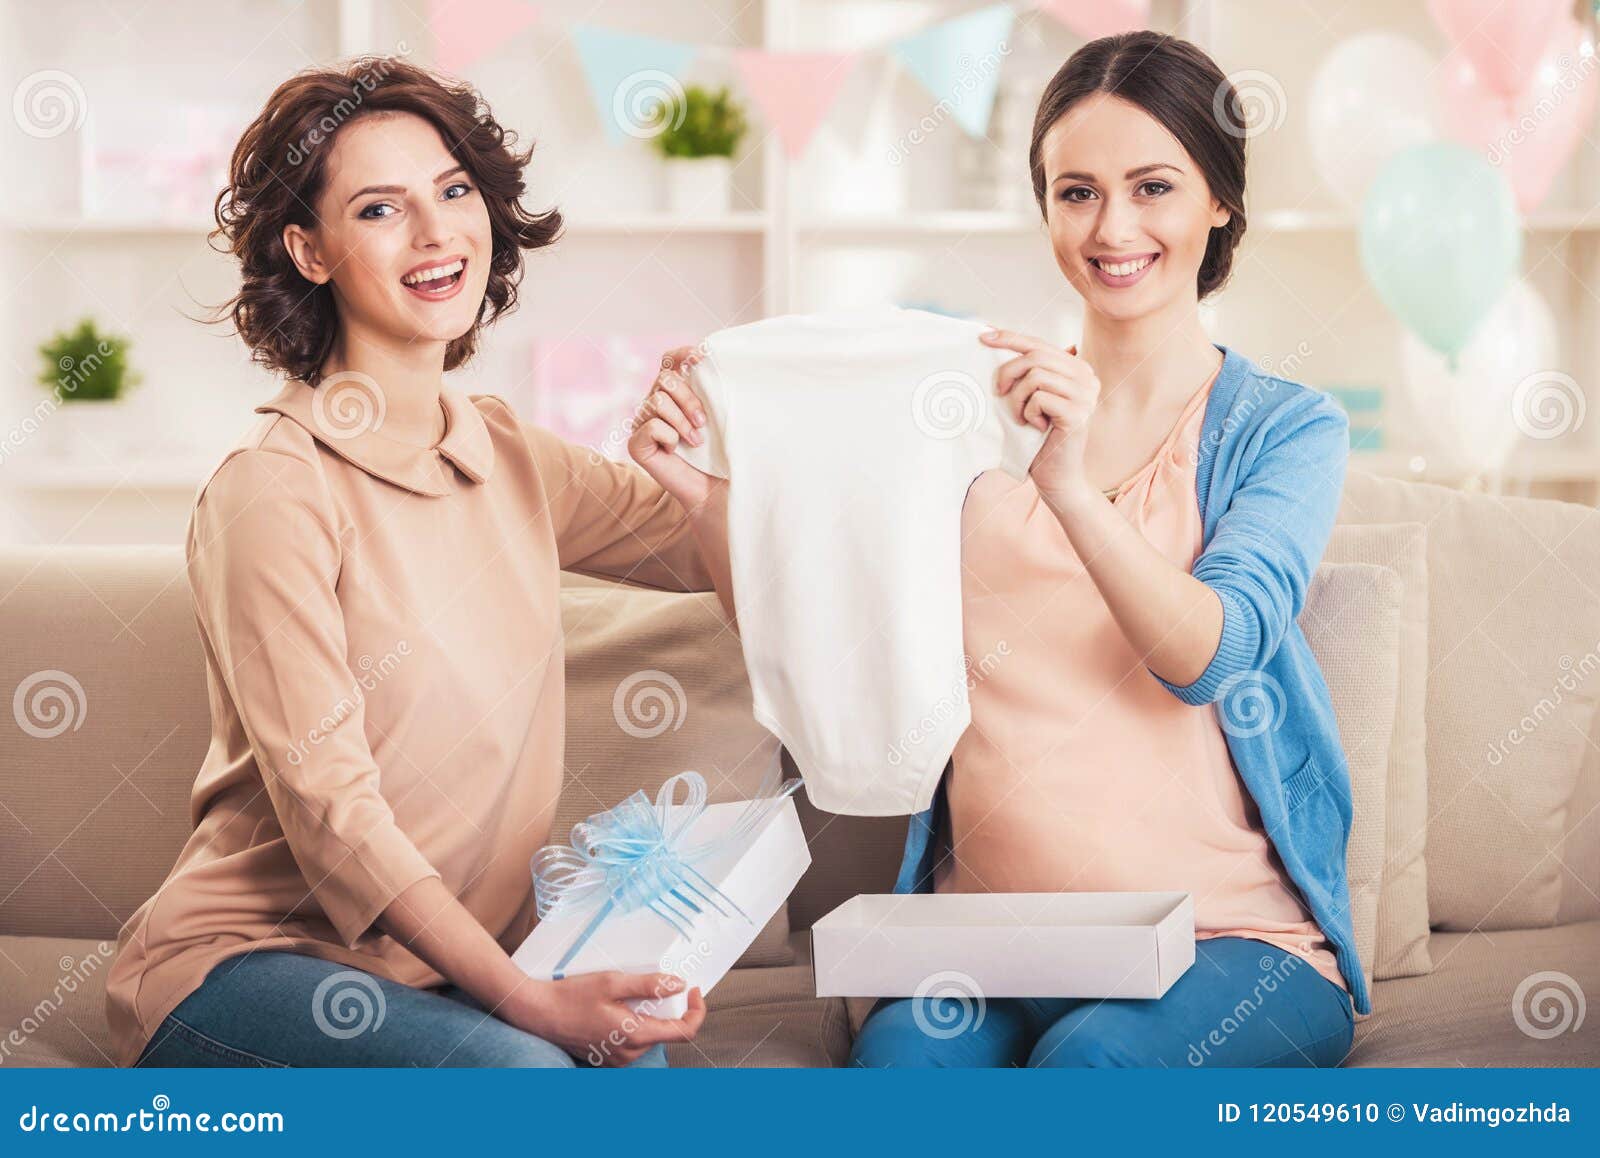 pregnant woman with friend holding baby romper.